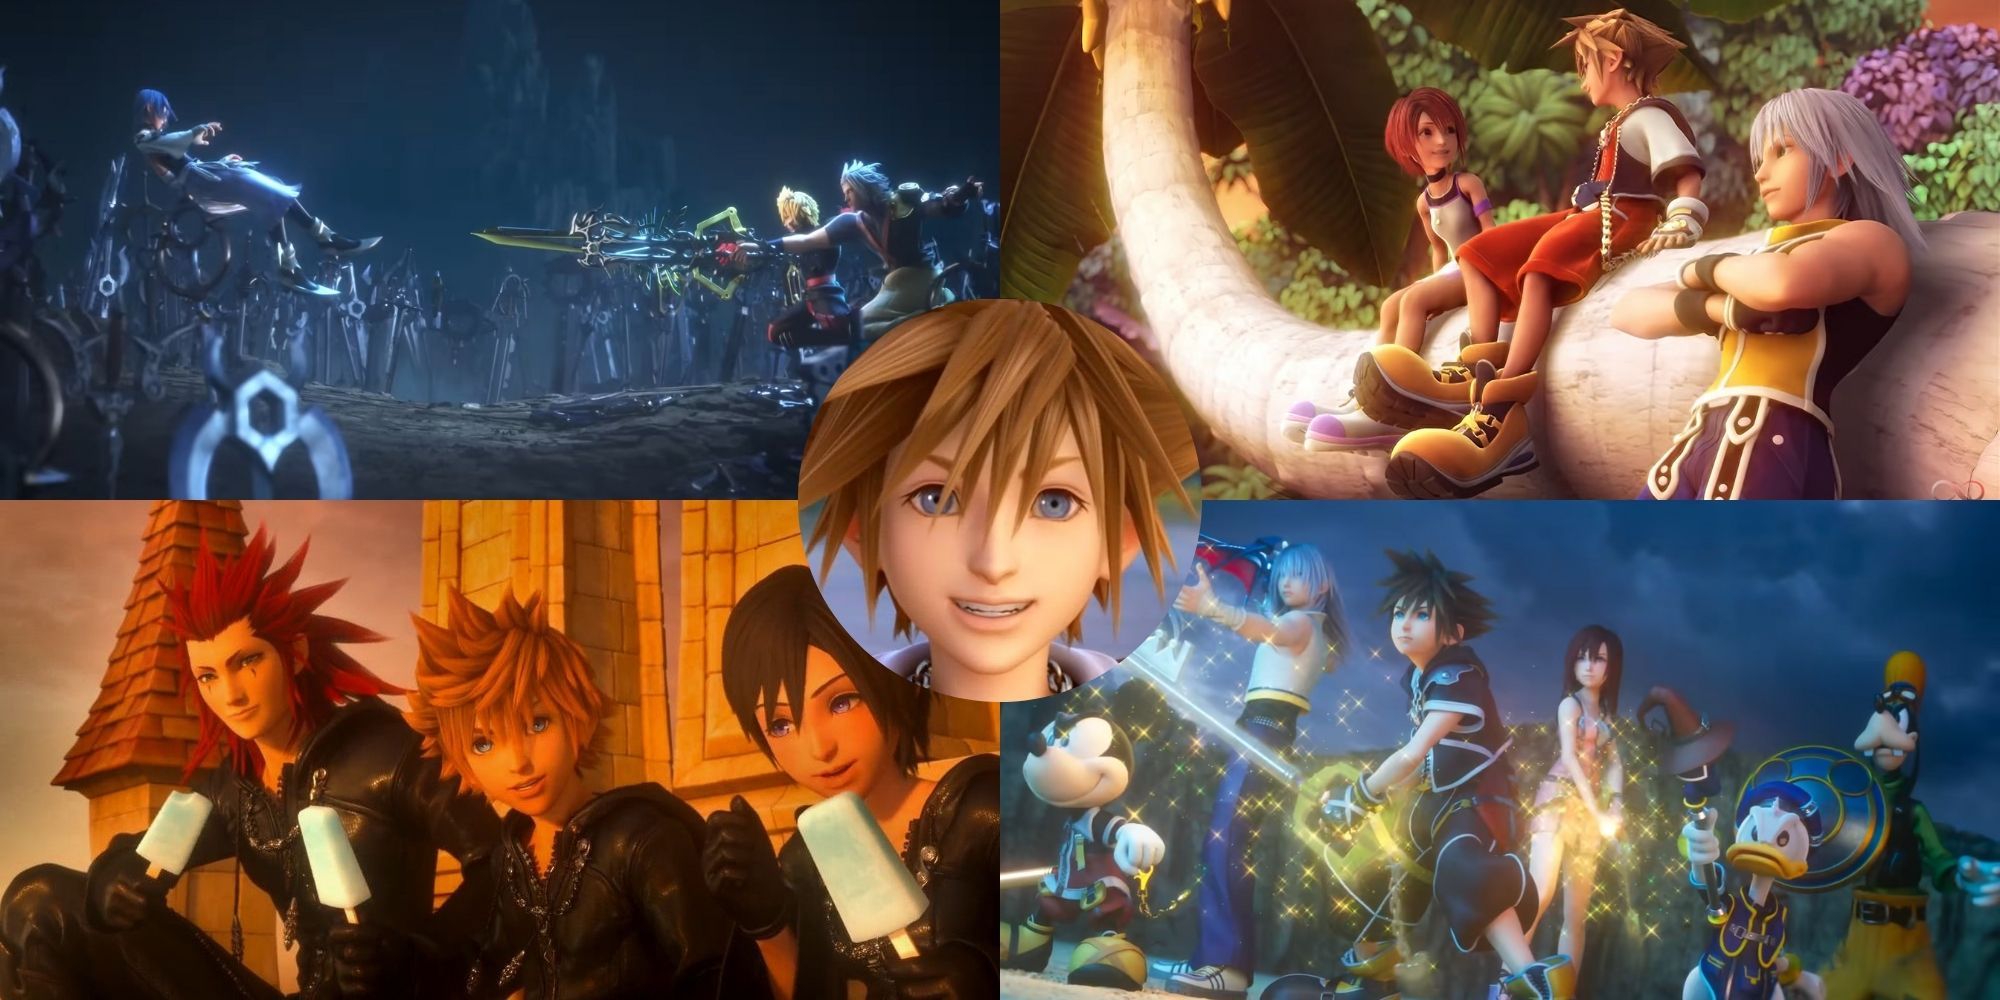 A collage of Sora alongside cutscenes from different Kingdom Hearts games: Birth by Sleep, Kingdom Hearts 1, 358/2 Days and Kingdom Hearts 3.